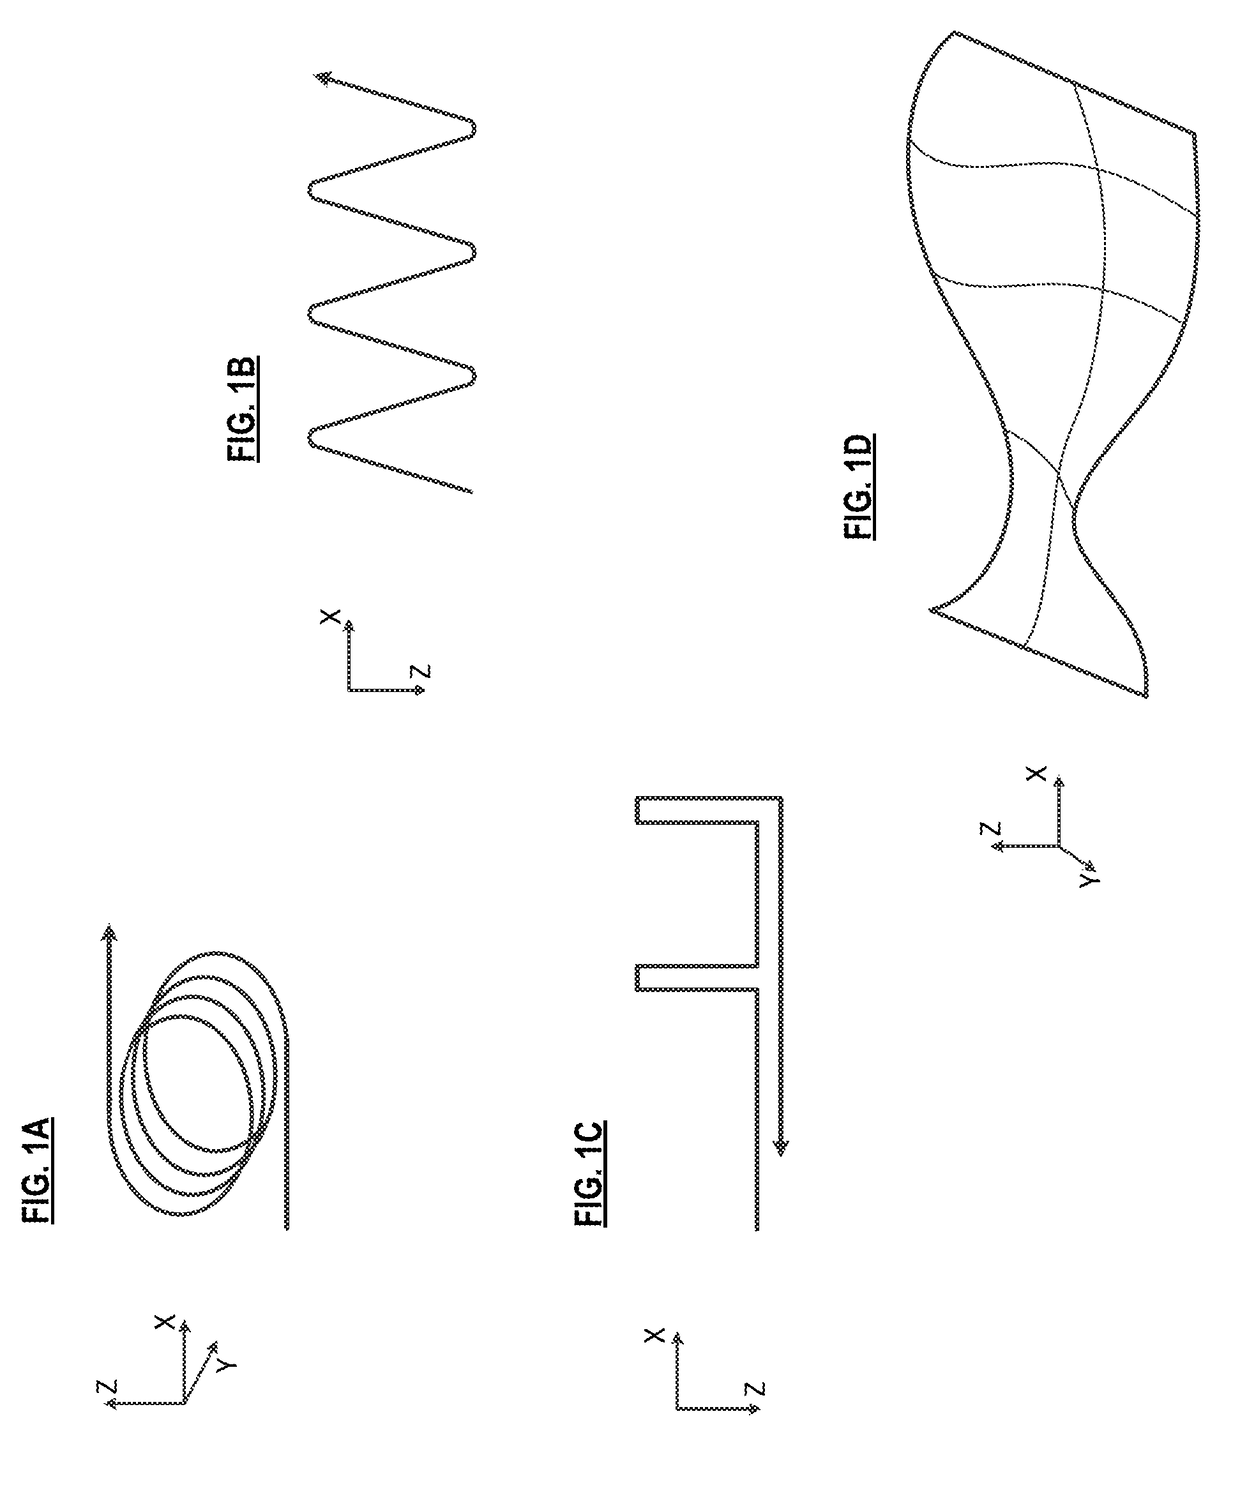 Method and Apparatus for Additive Manufacturing Using Filament Shaping